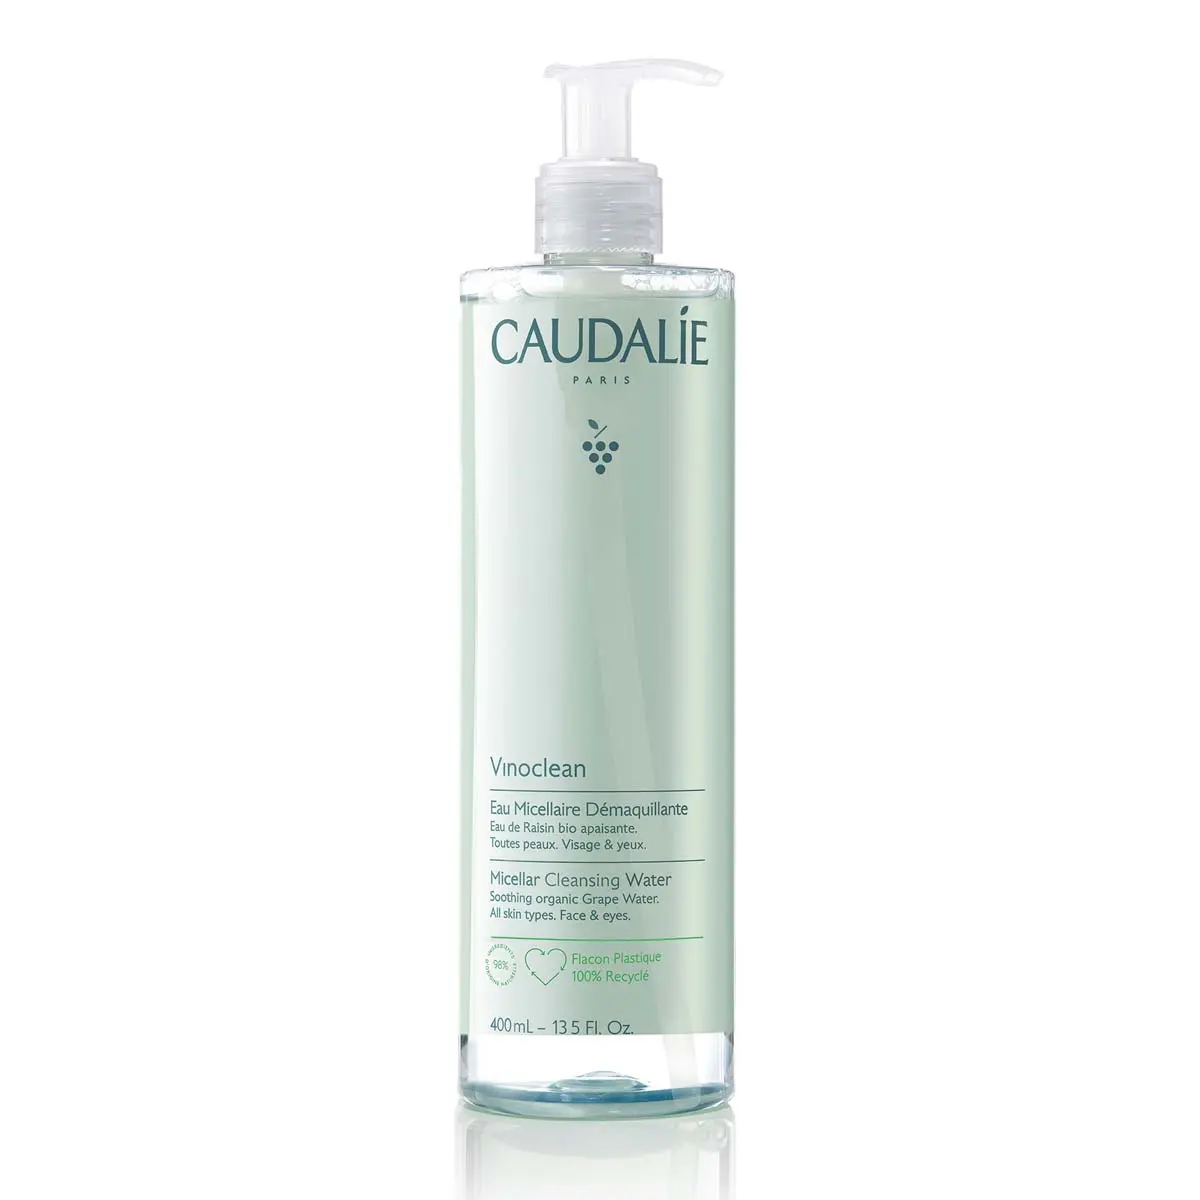 Caudalie Vinoclean Supersize Micellar Cleansing Water 400ml Discounts and Cashback